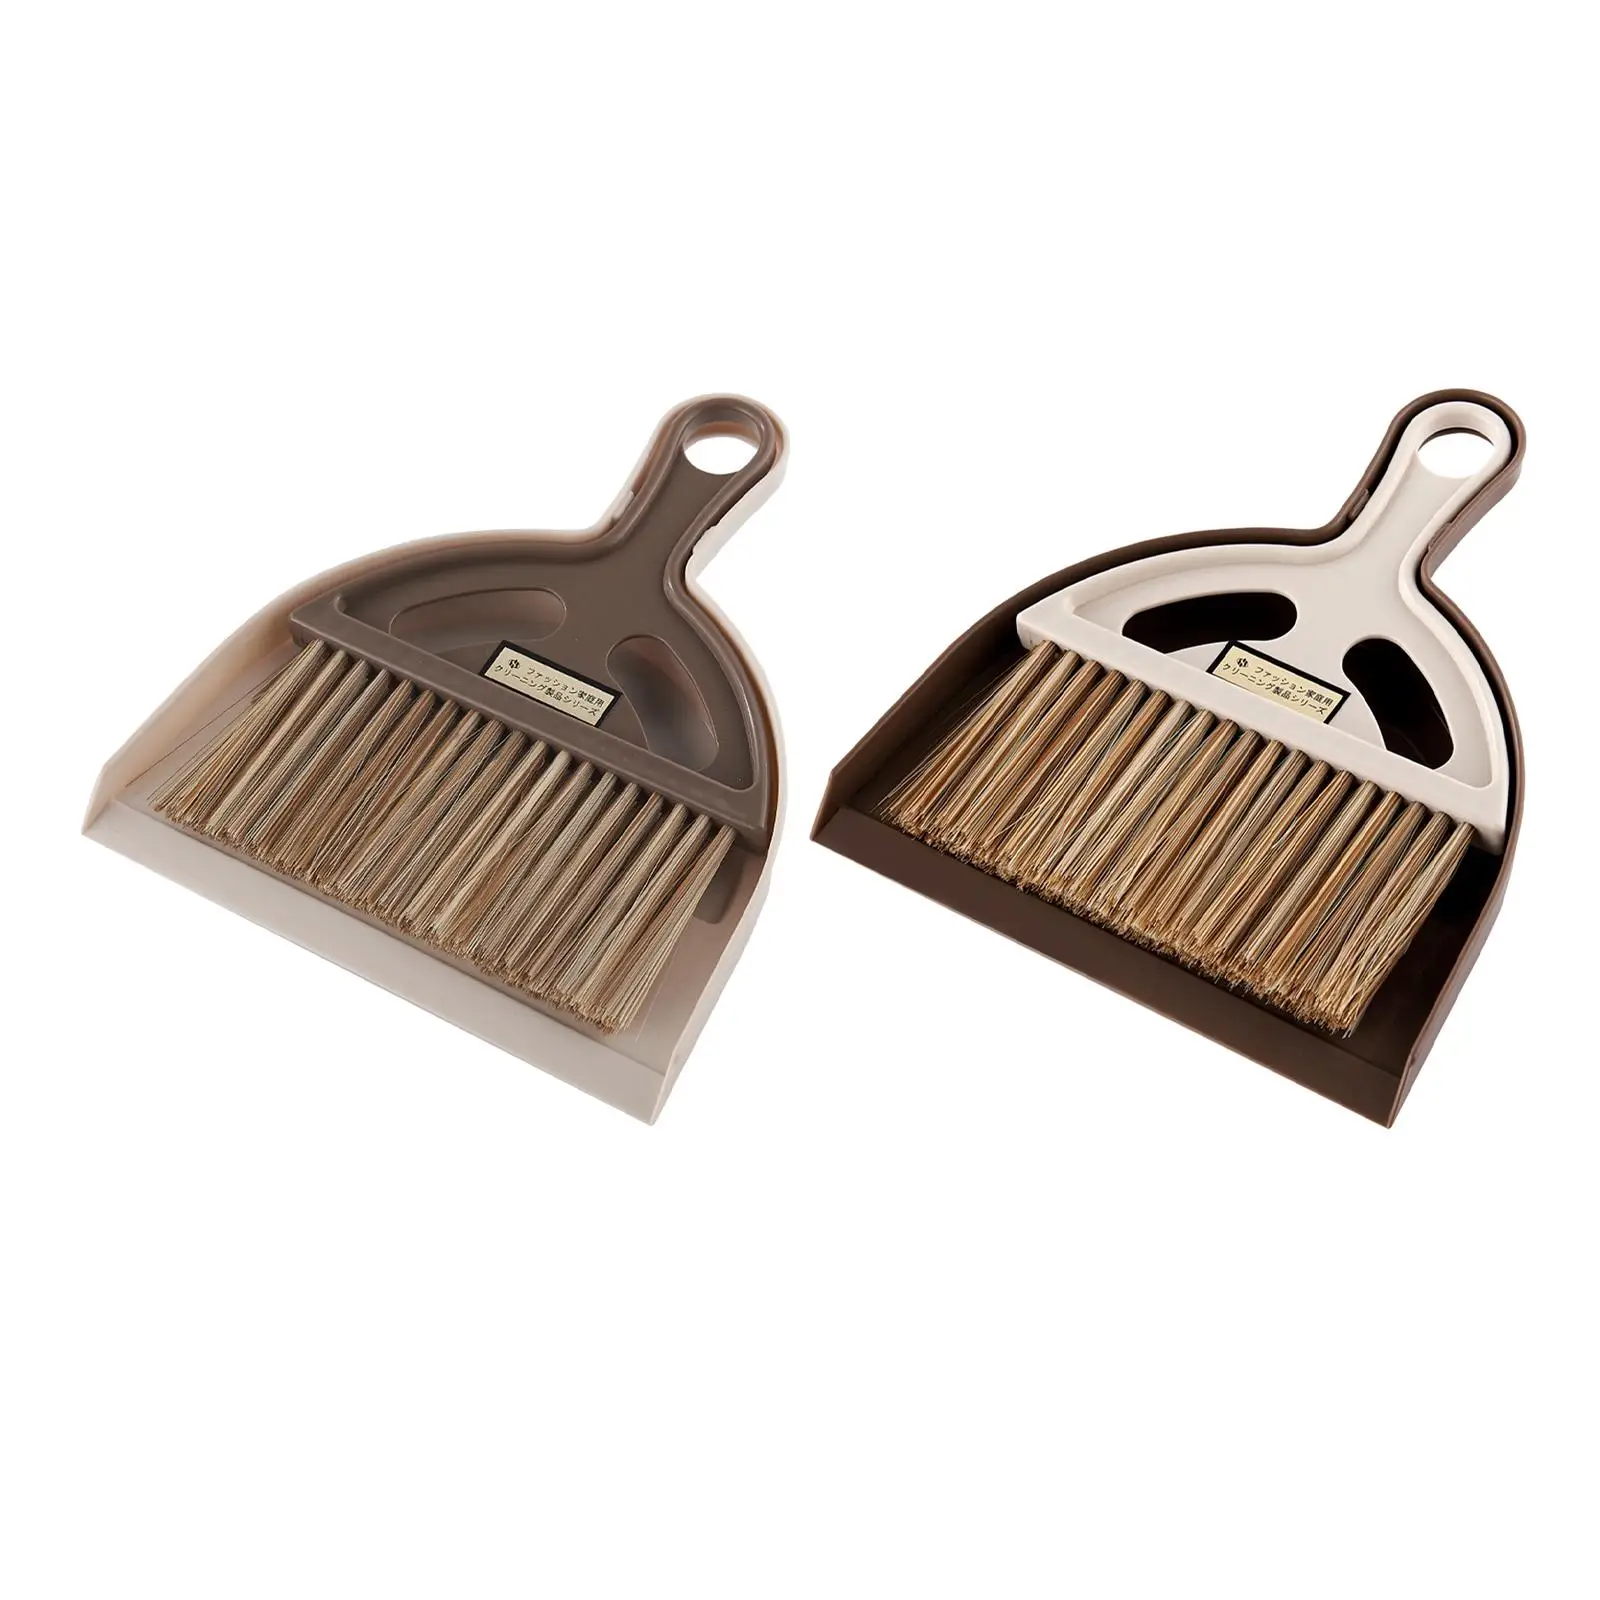 Small Broom and Dustpan Set Portable Hand Broom for Desktop Home Cleaning